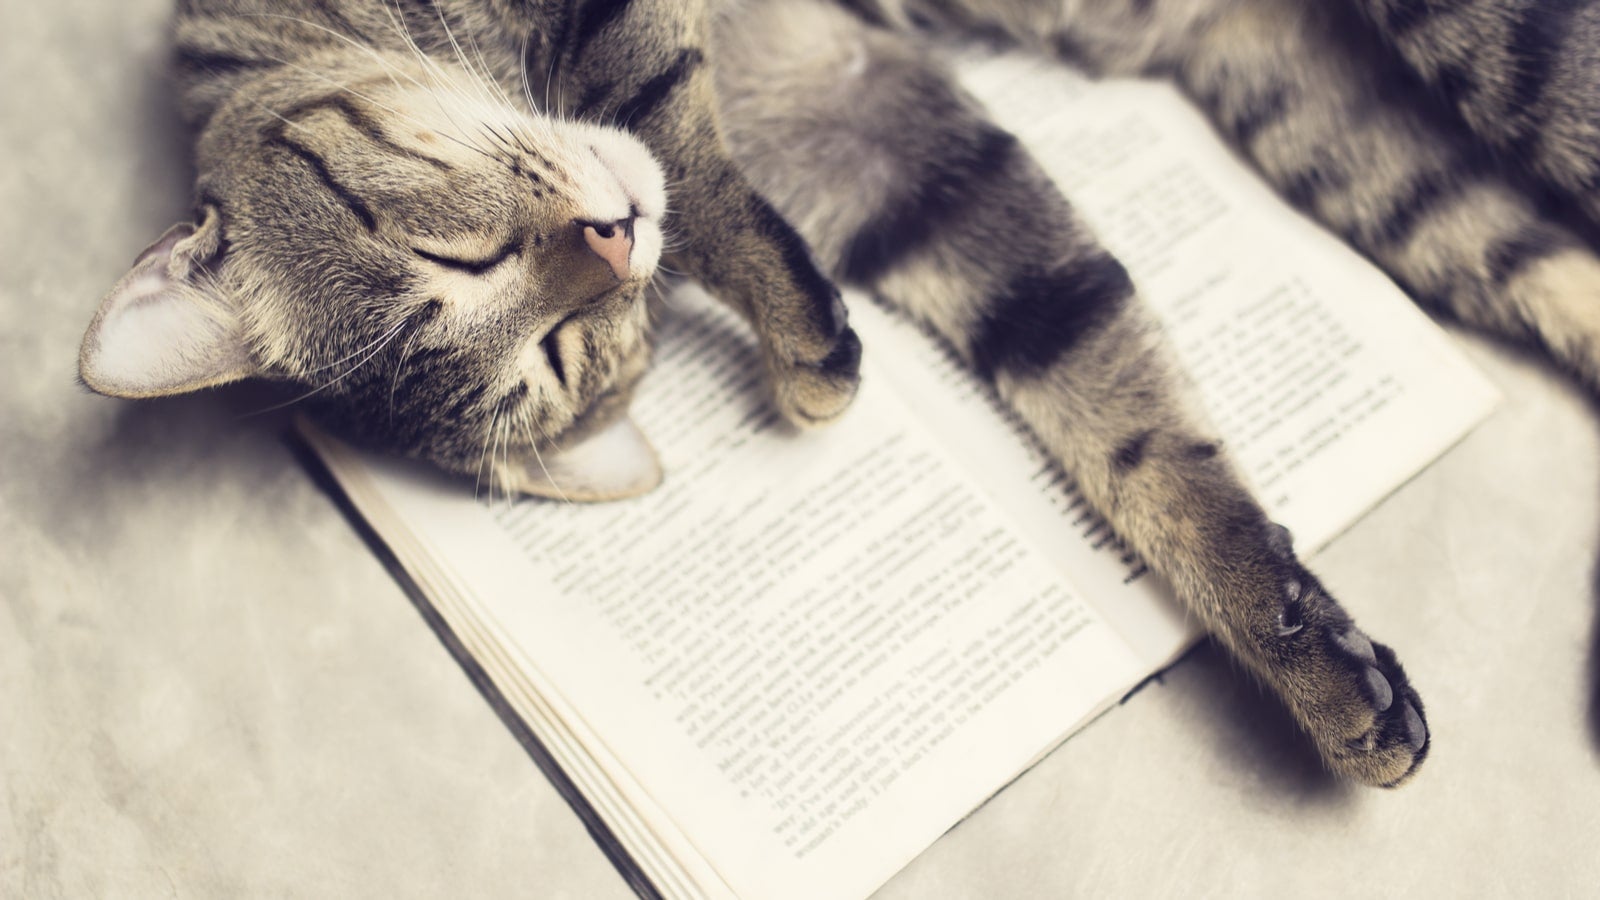 Peaceful cat laying on a book.